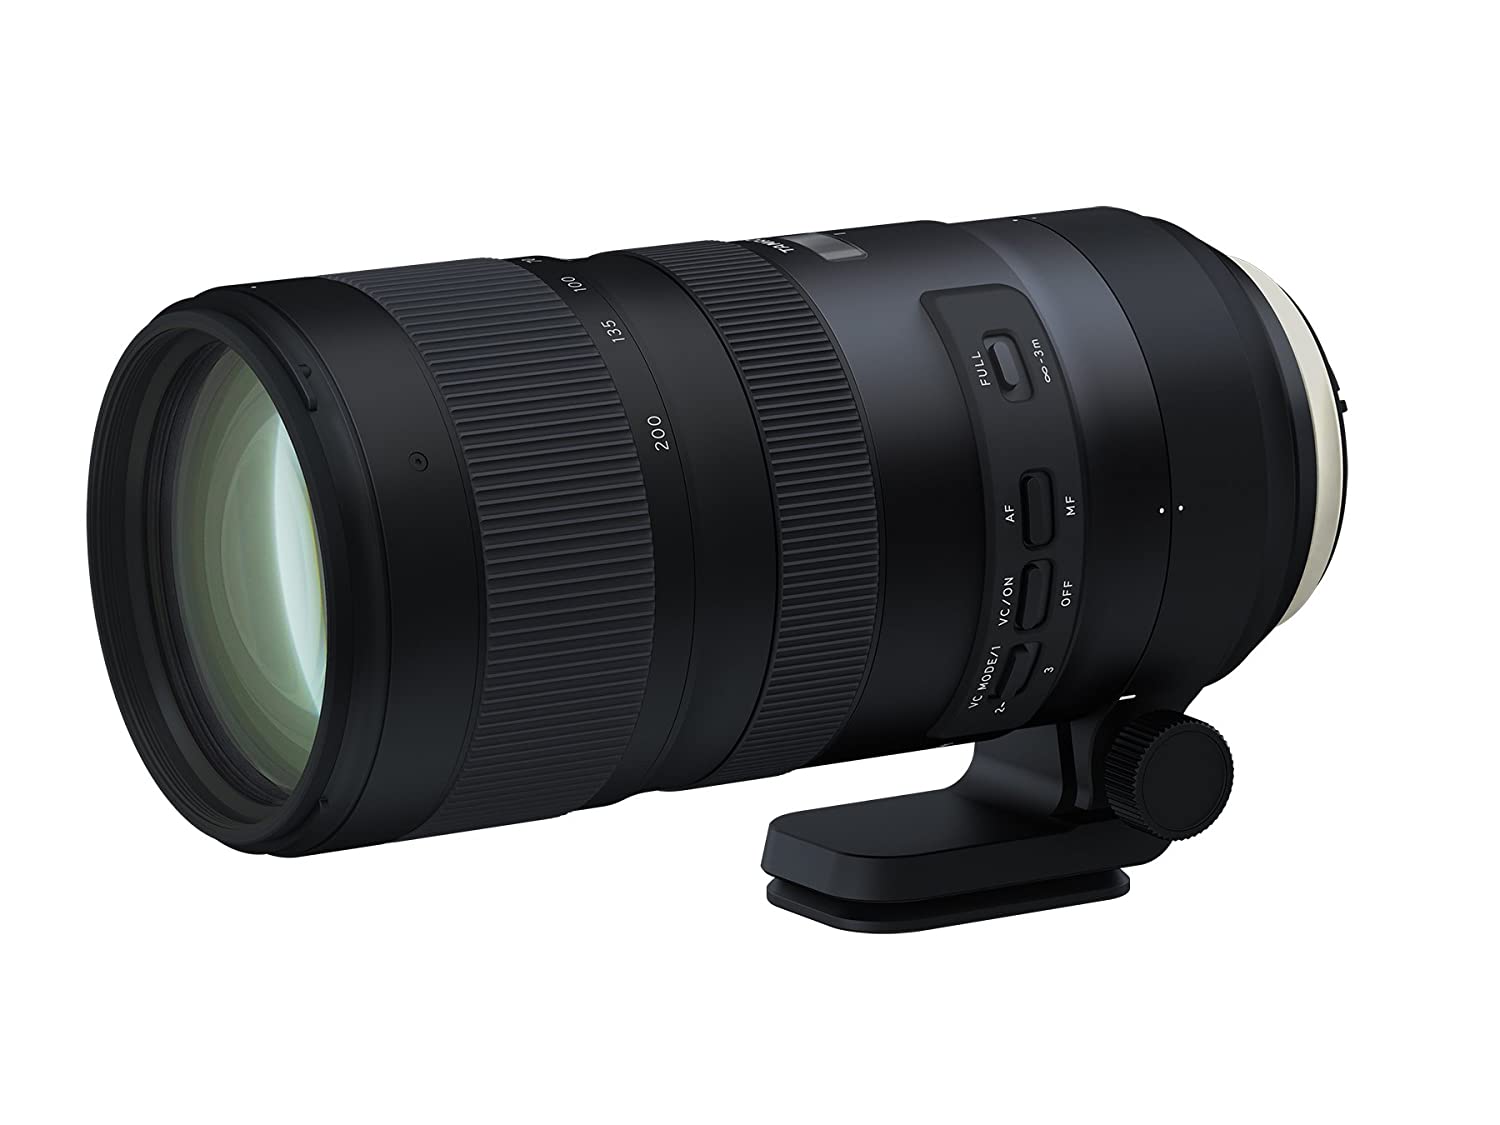 Tamron SP 70-200mm F/2.8 Di VC USD G2 Best Lenses For Camera In India